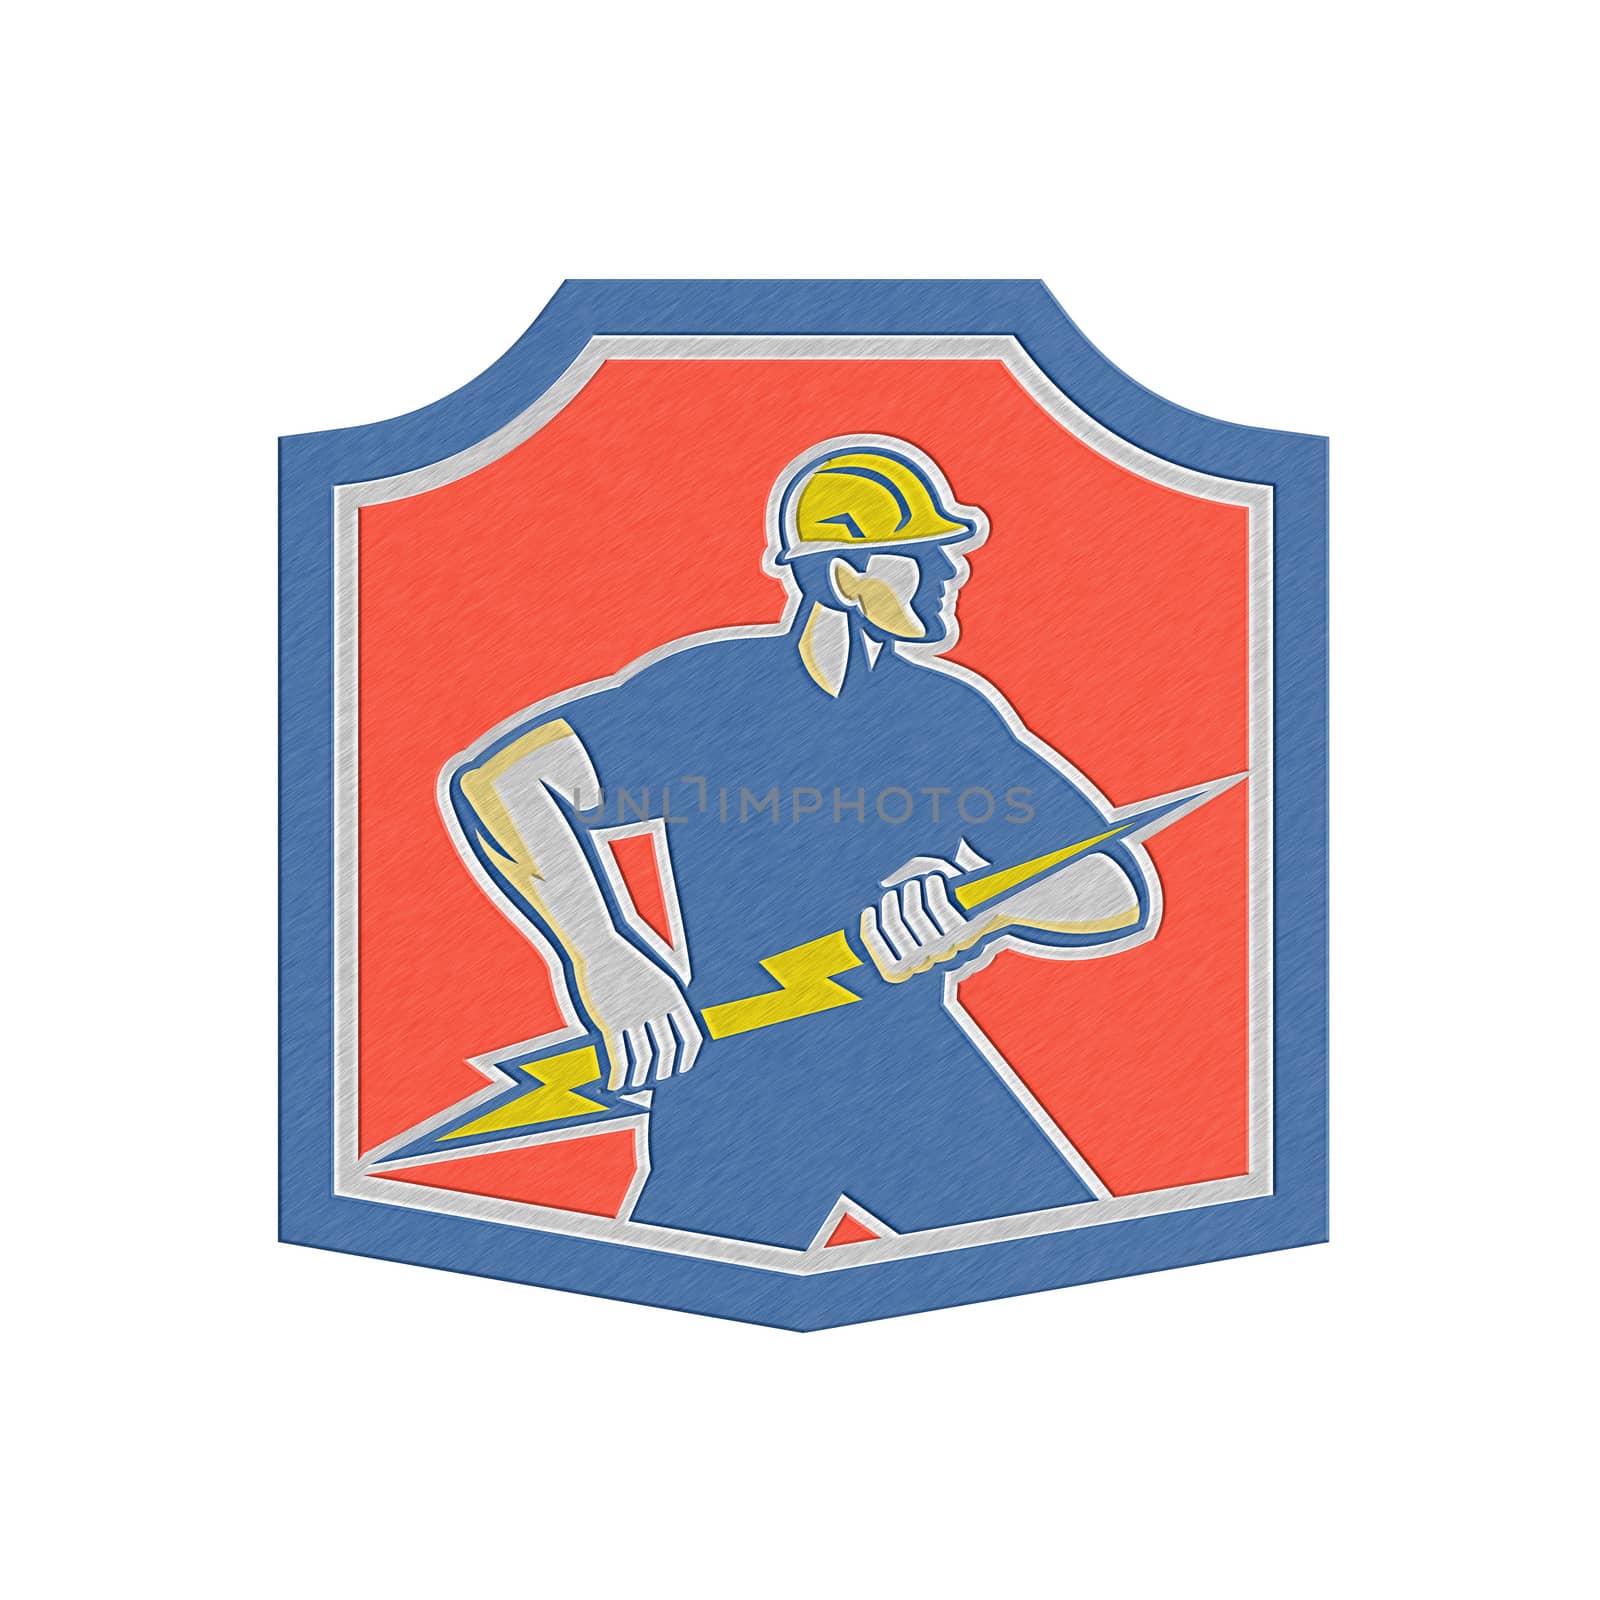 Metallic styled illustration of an electrician holding a lightning bolt facing side done in retro style set inside a crest. 